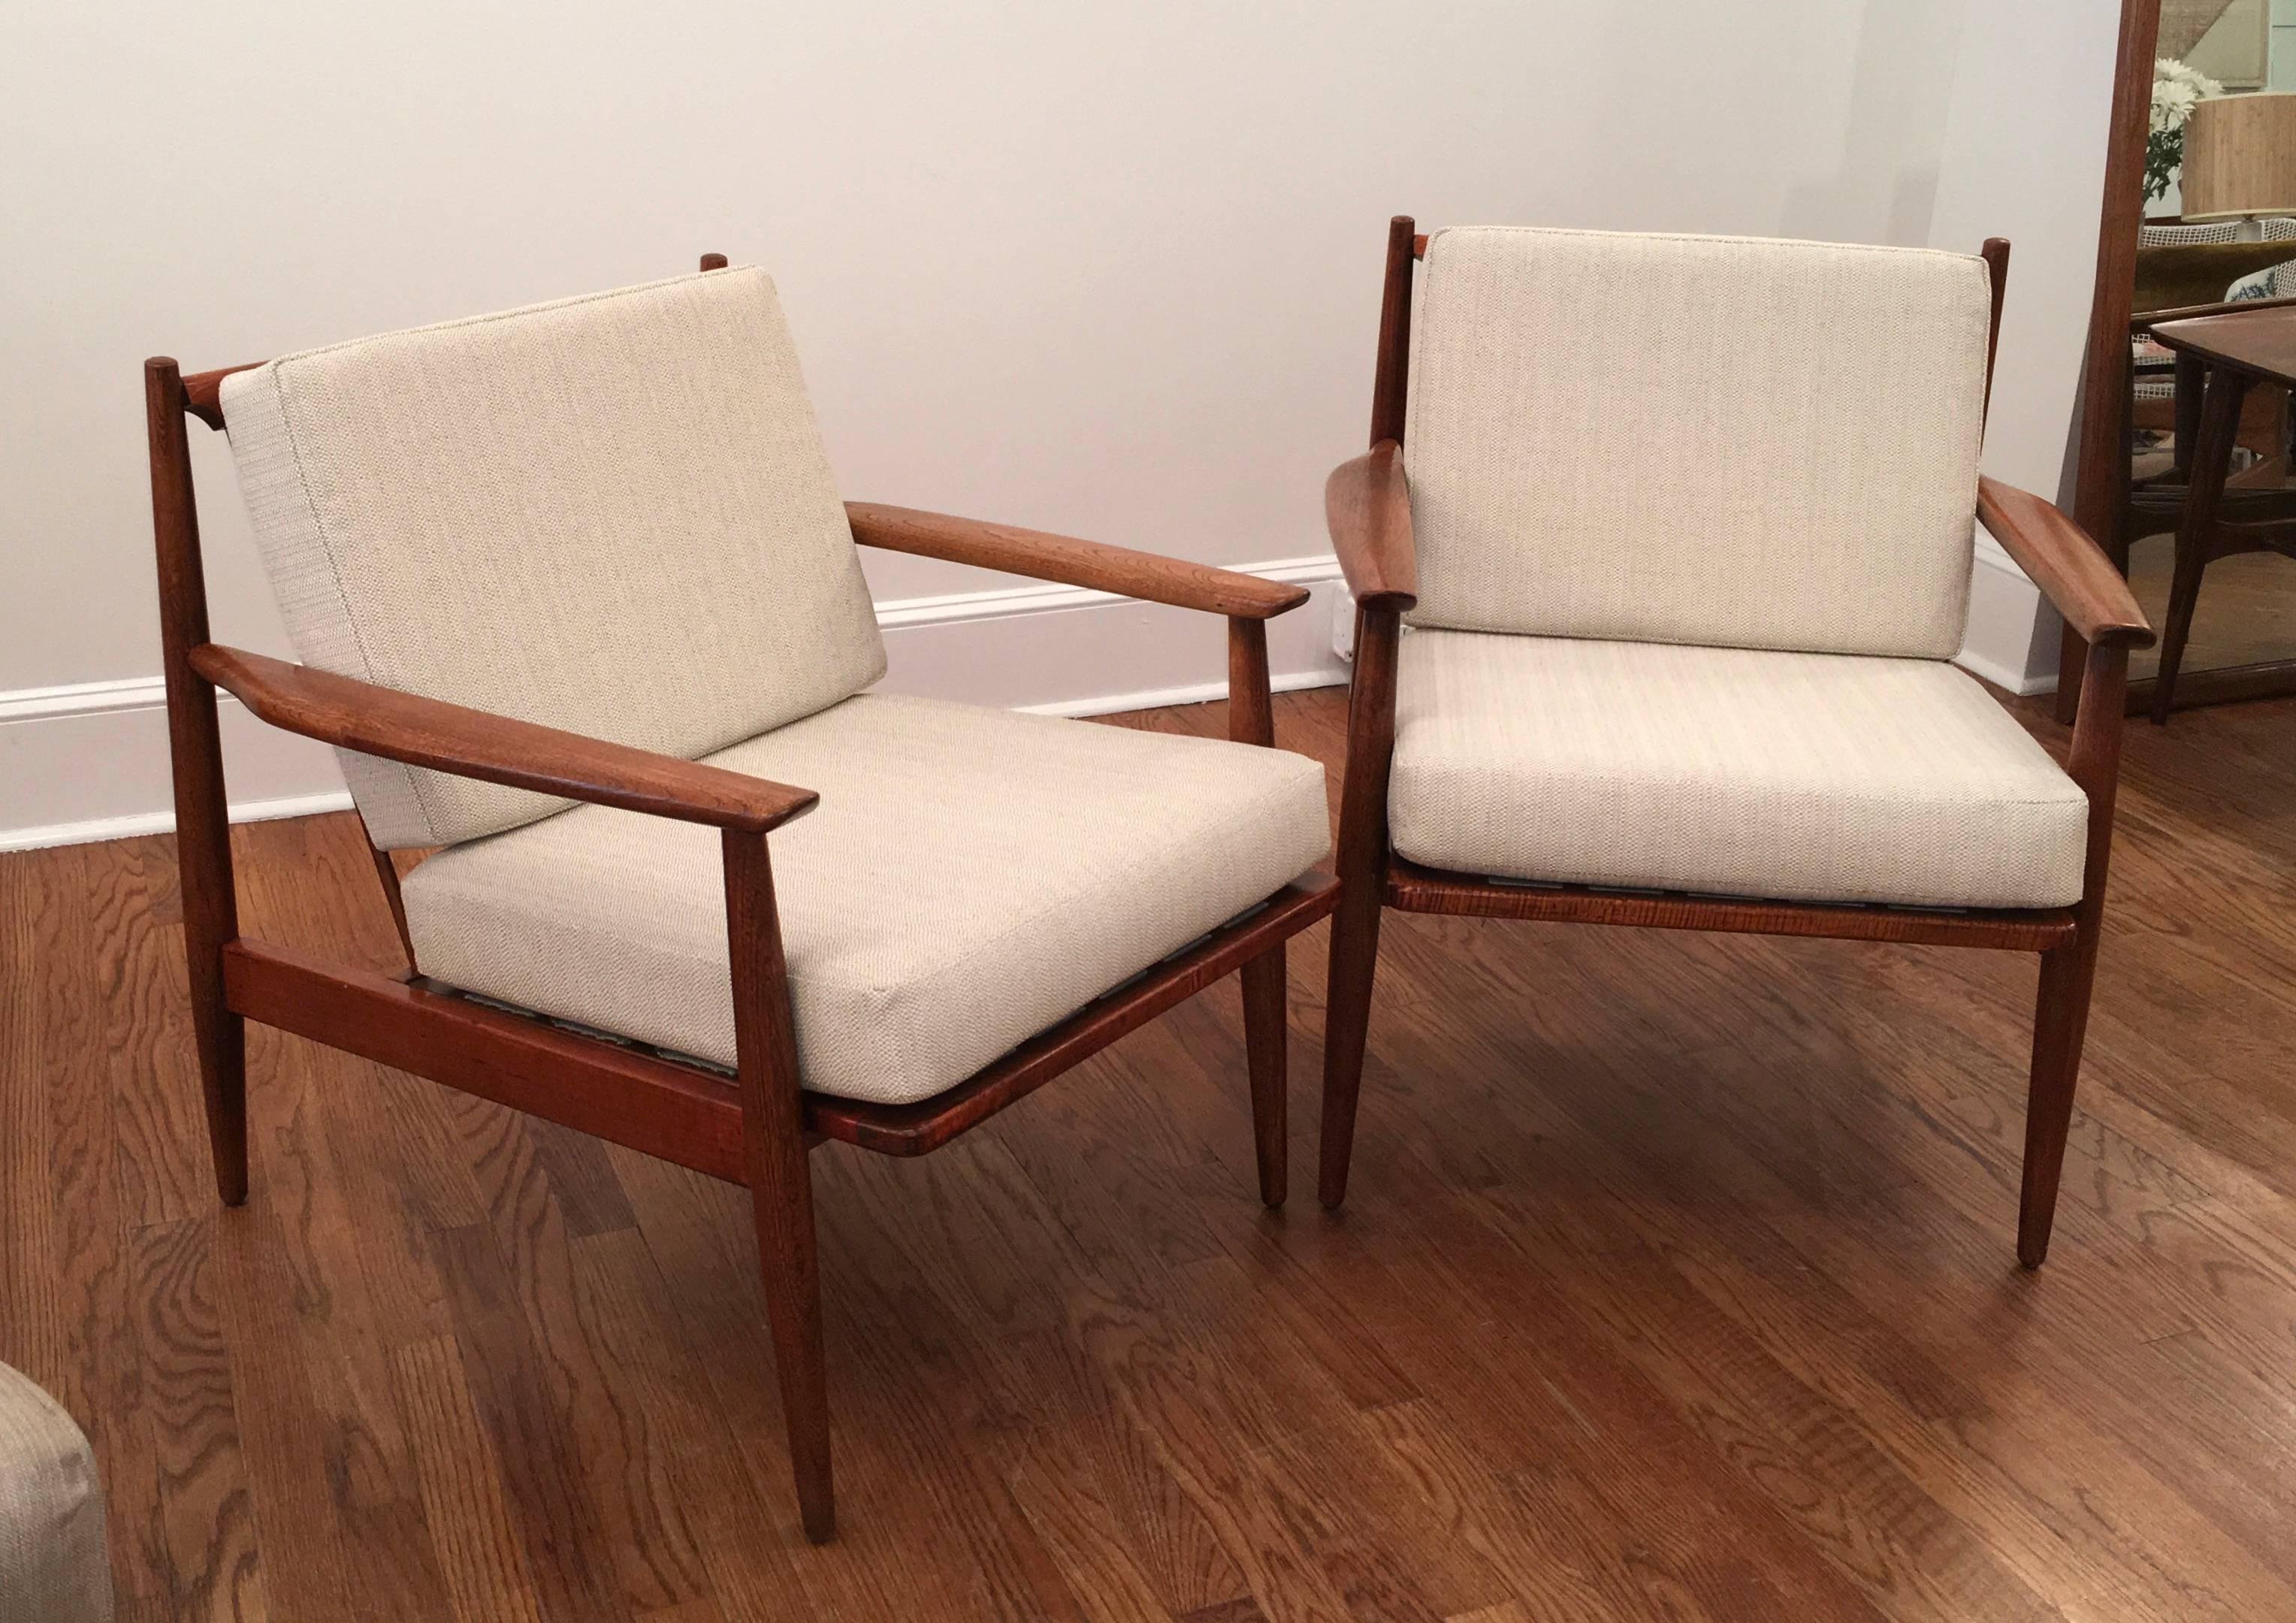 Two walnut armchairs by Baumeister. Recently refinished. New cushions. Deep, comfortable seats newly upholstered.